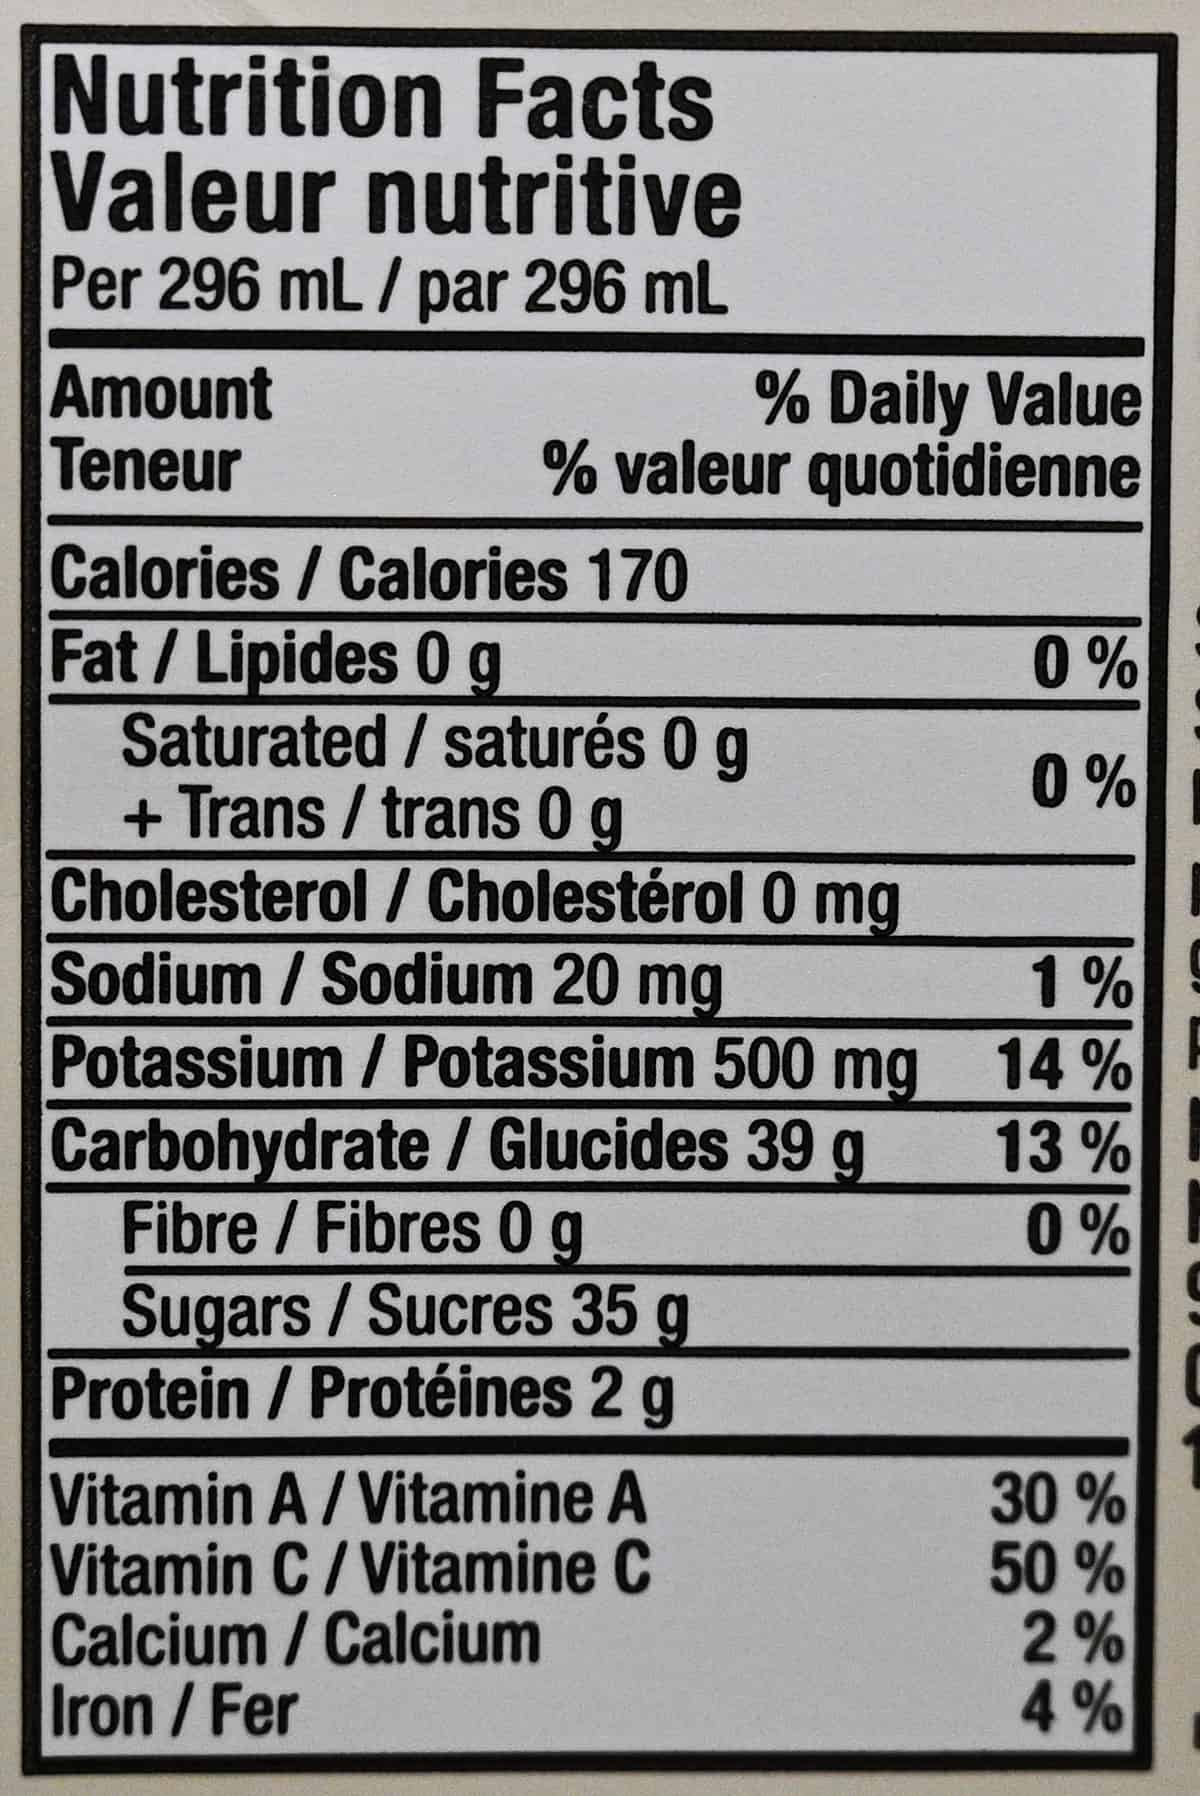 Image of the green machine nutrition facts label from the back of the container.